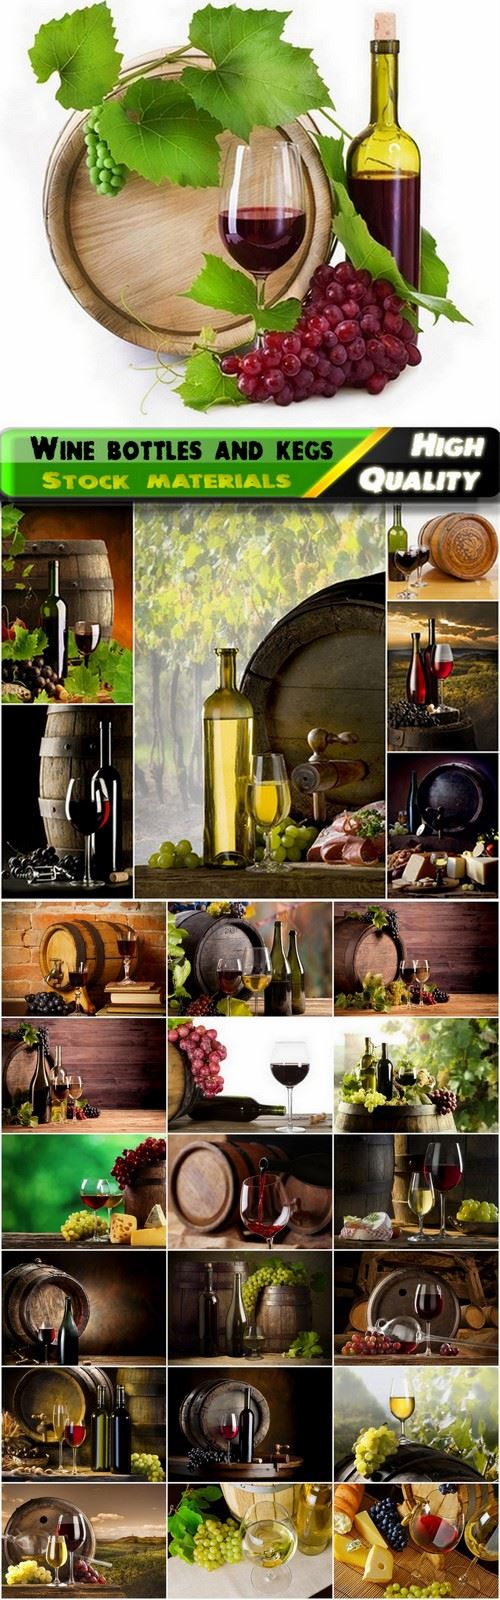 Wine bottles and glasses and wooden kegs - 25 HQ Jpg